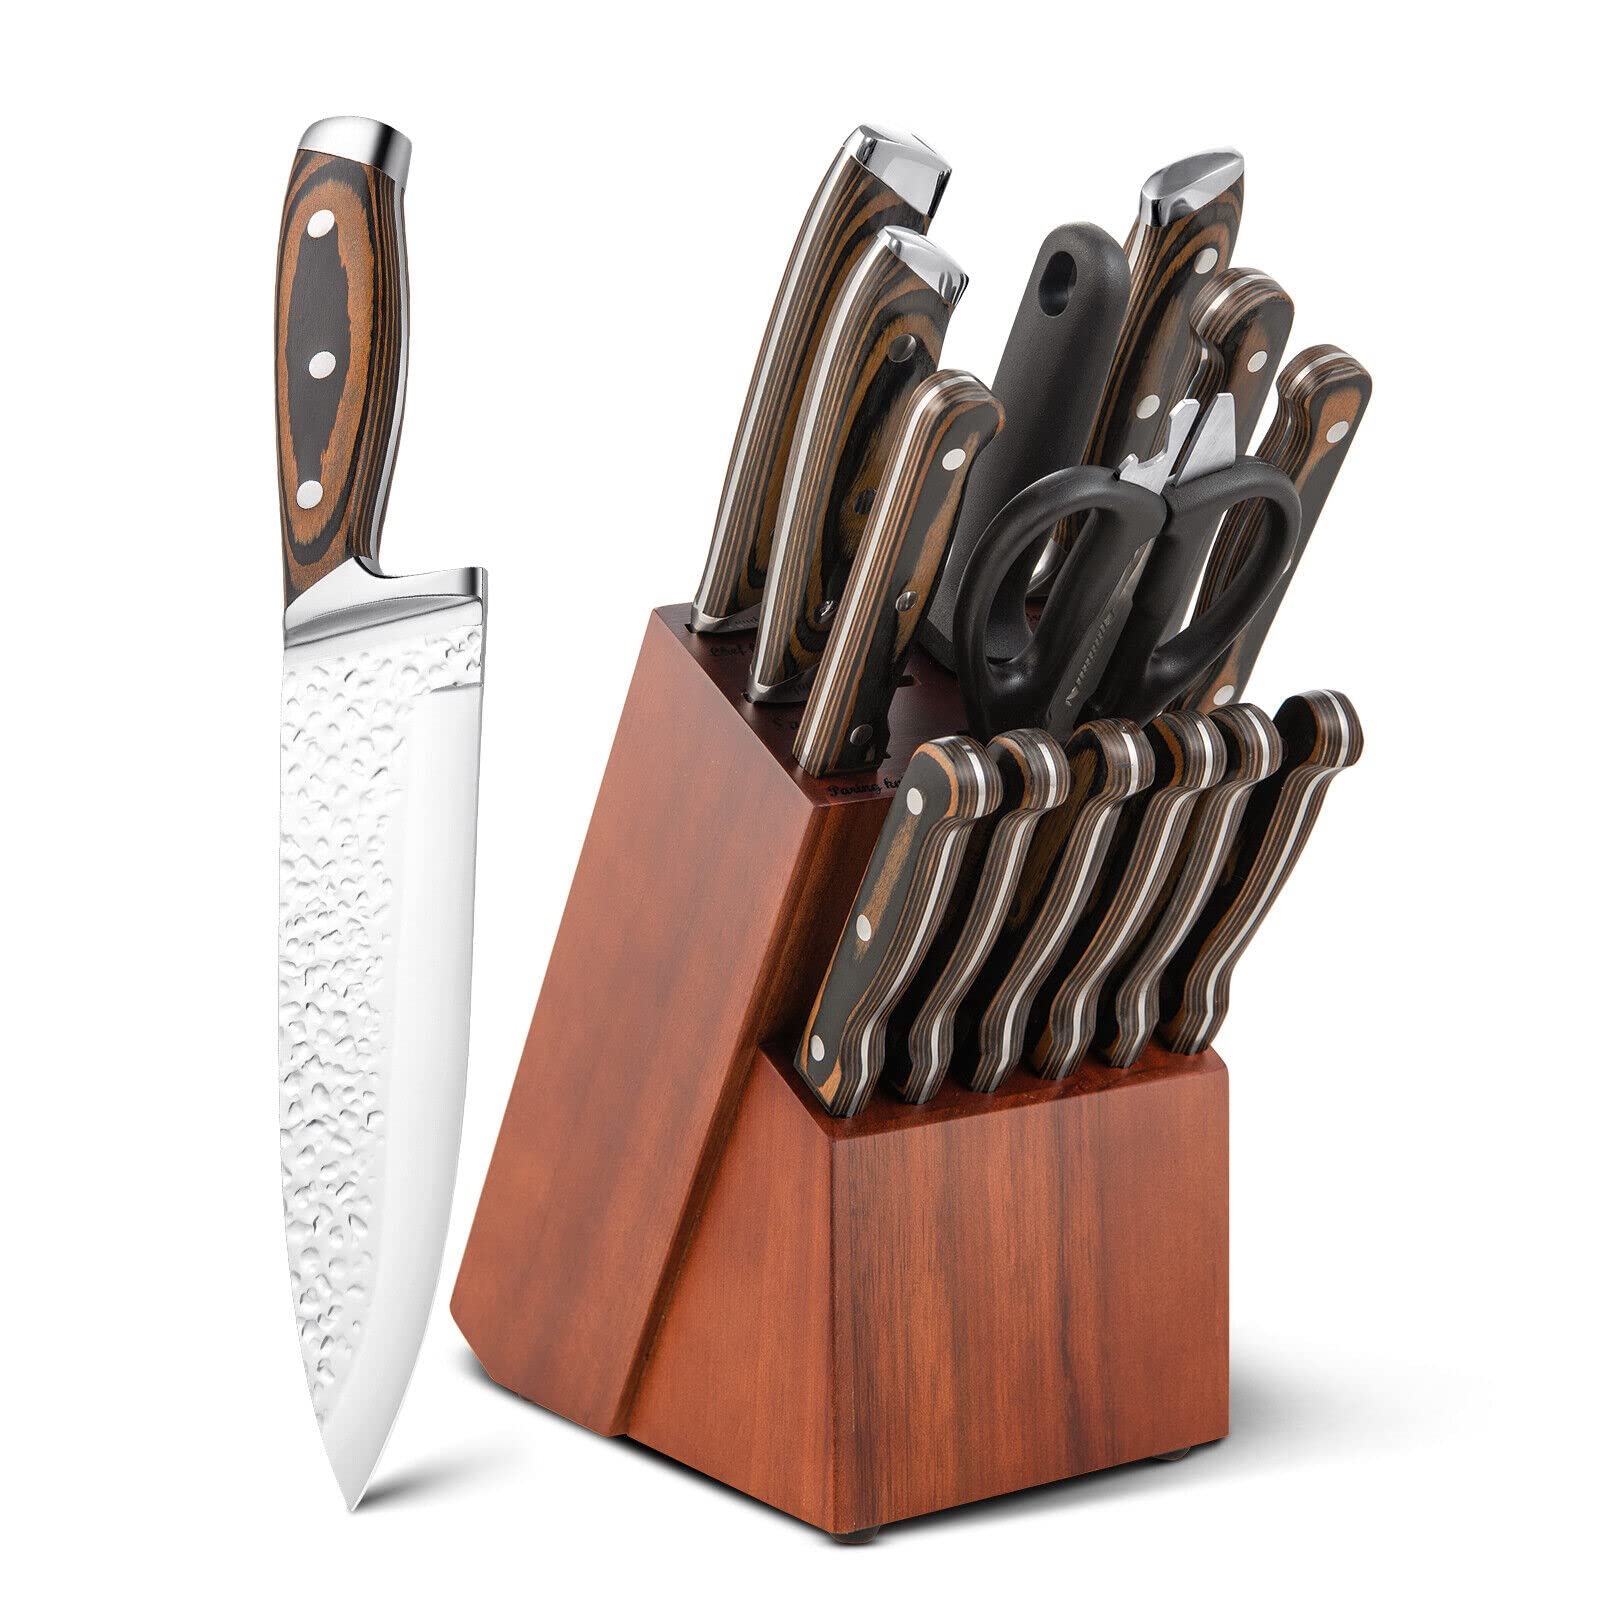 15-Piece Knife Set with Wooden Block Stainless Steel Steak Knives for  Kitchen